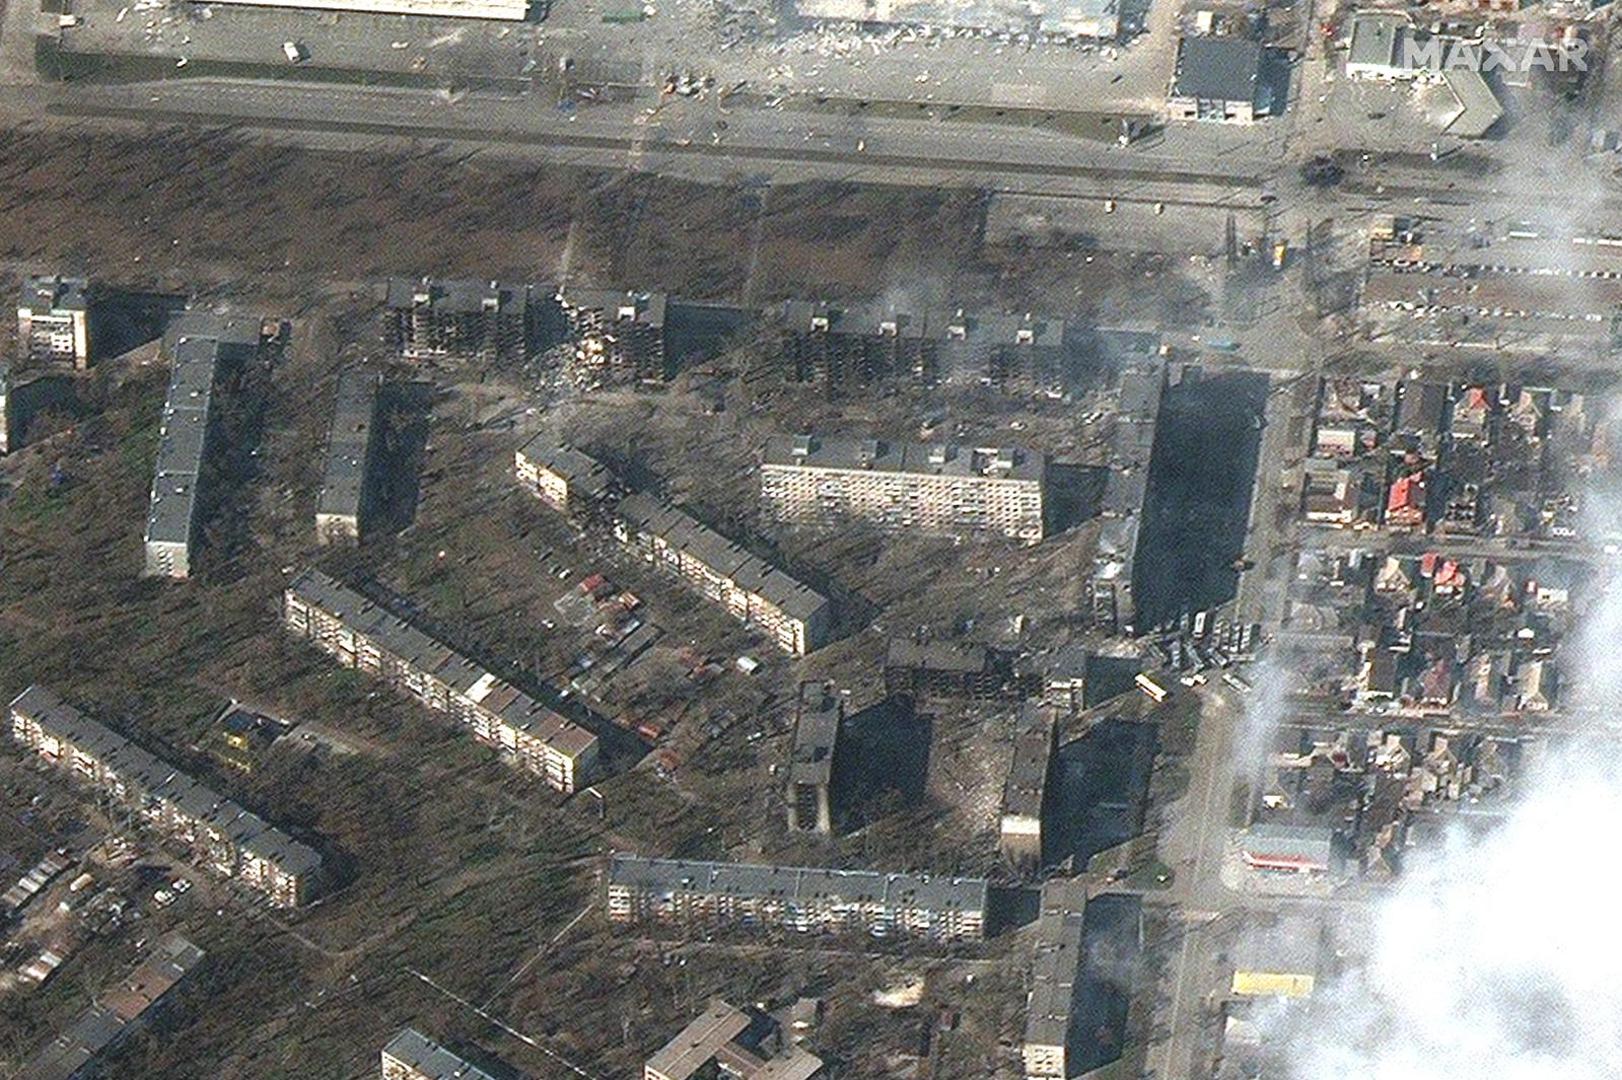 Satellite view of burning, heavily damaged apartment buildings and stores, as Russia's invasion of Ukraine continues, Mariupol, March 18, 2022 in this handout. Satellite image (C) 2022 Maxar Technologies/Handout via REUTERS ATTENTION EDITORS - THIS IMAGE HAS BEEN SUPPLIED BY A THIRD PARTY. MANDATORY CREDIT. WATERMARK MAY NOT BE REMOVED/CROPPED. NO RESALES. NO ARCHIVES Photo: MAXAR TECHNOLOGIES/REUTERS